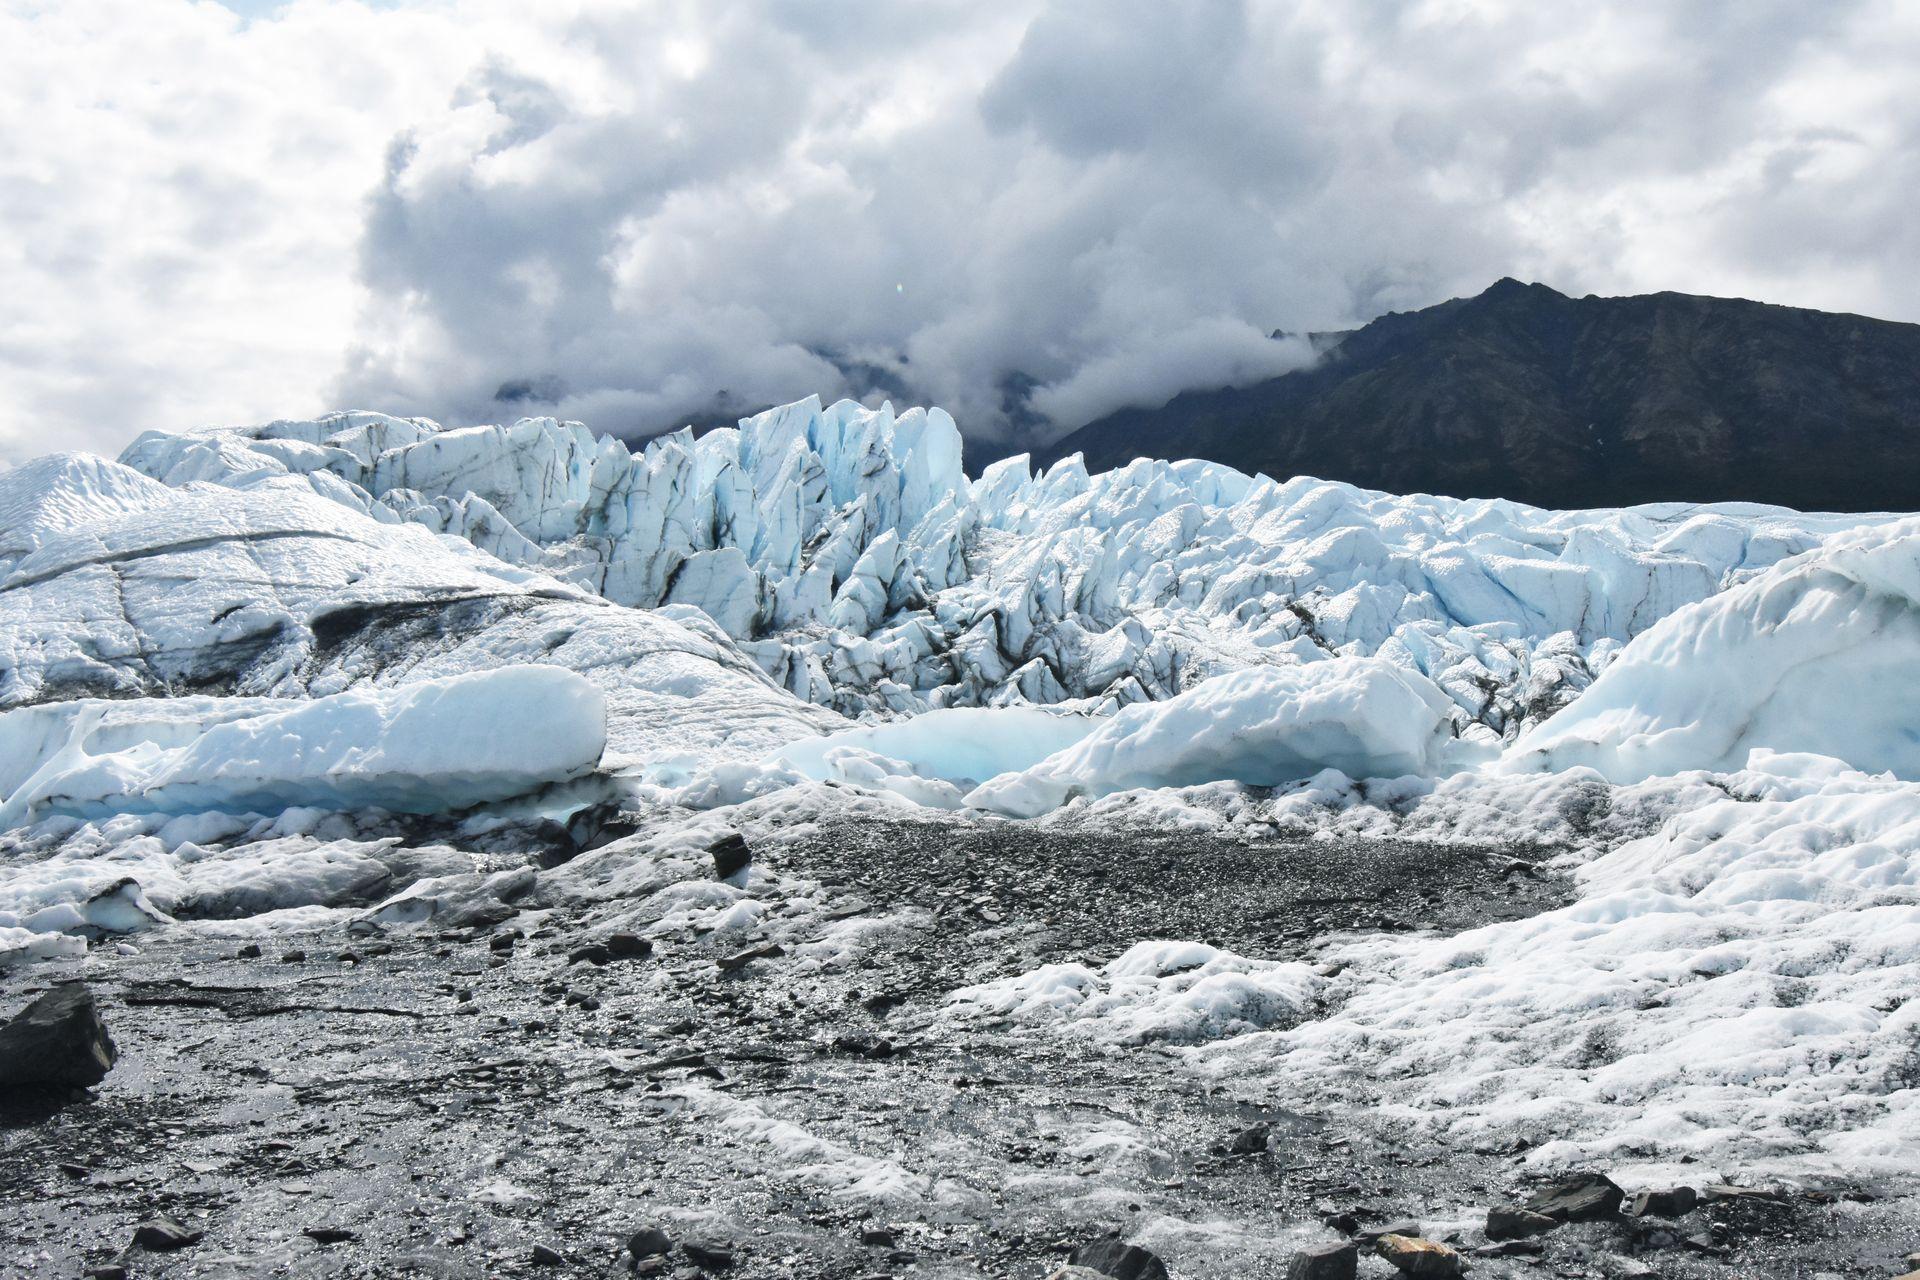 An expansive view of the ice that makes up Matanuska Glacier.